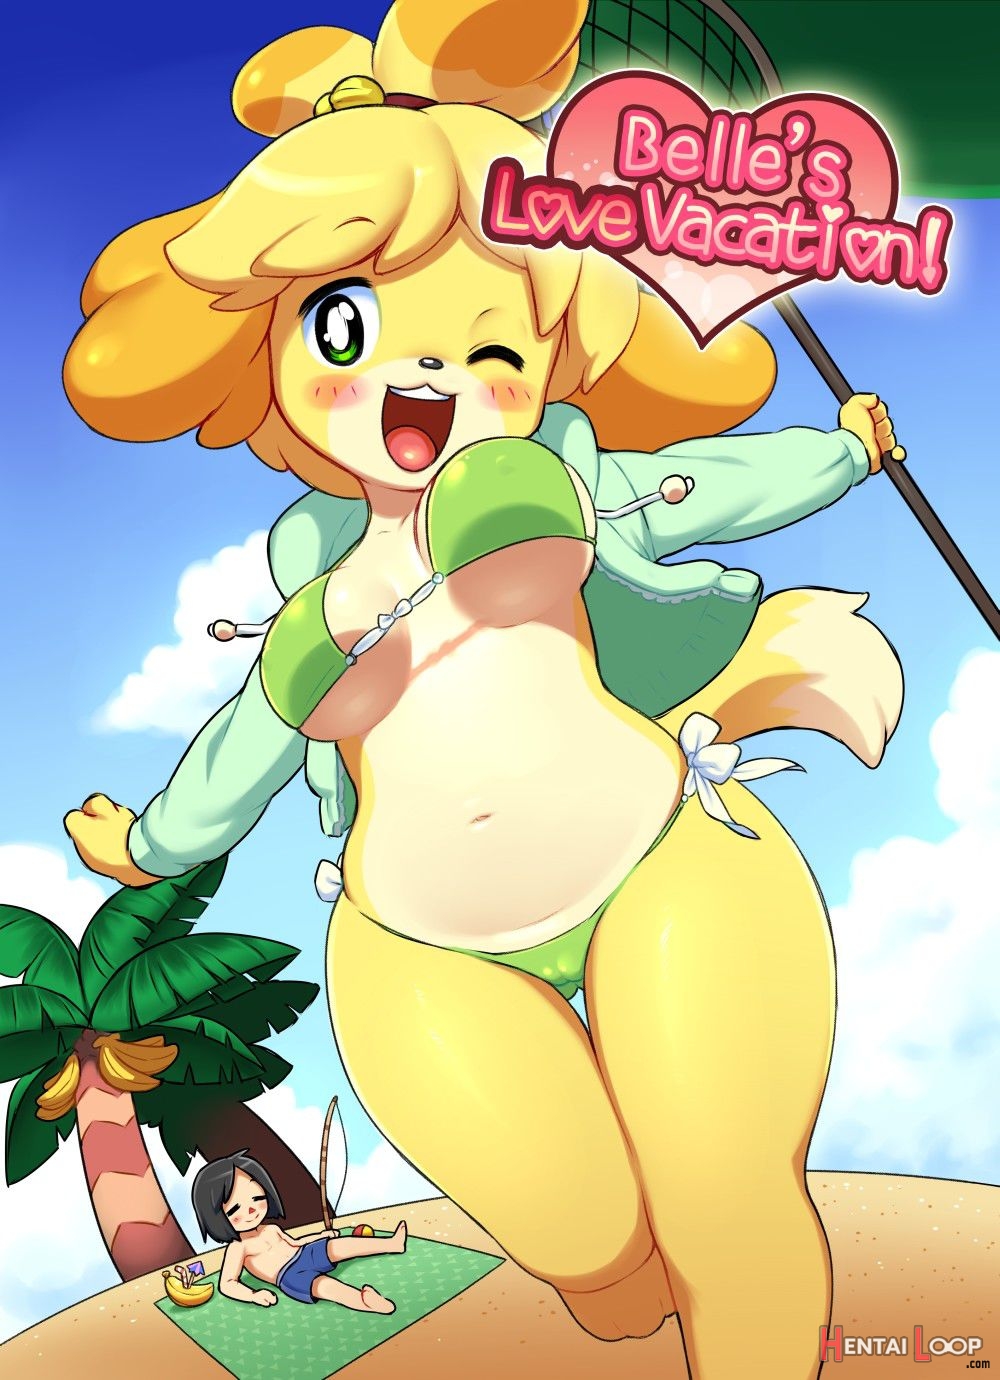 Belle's Love Vacation! page 1